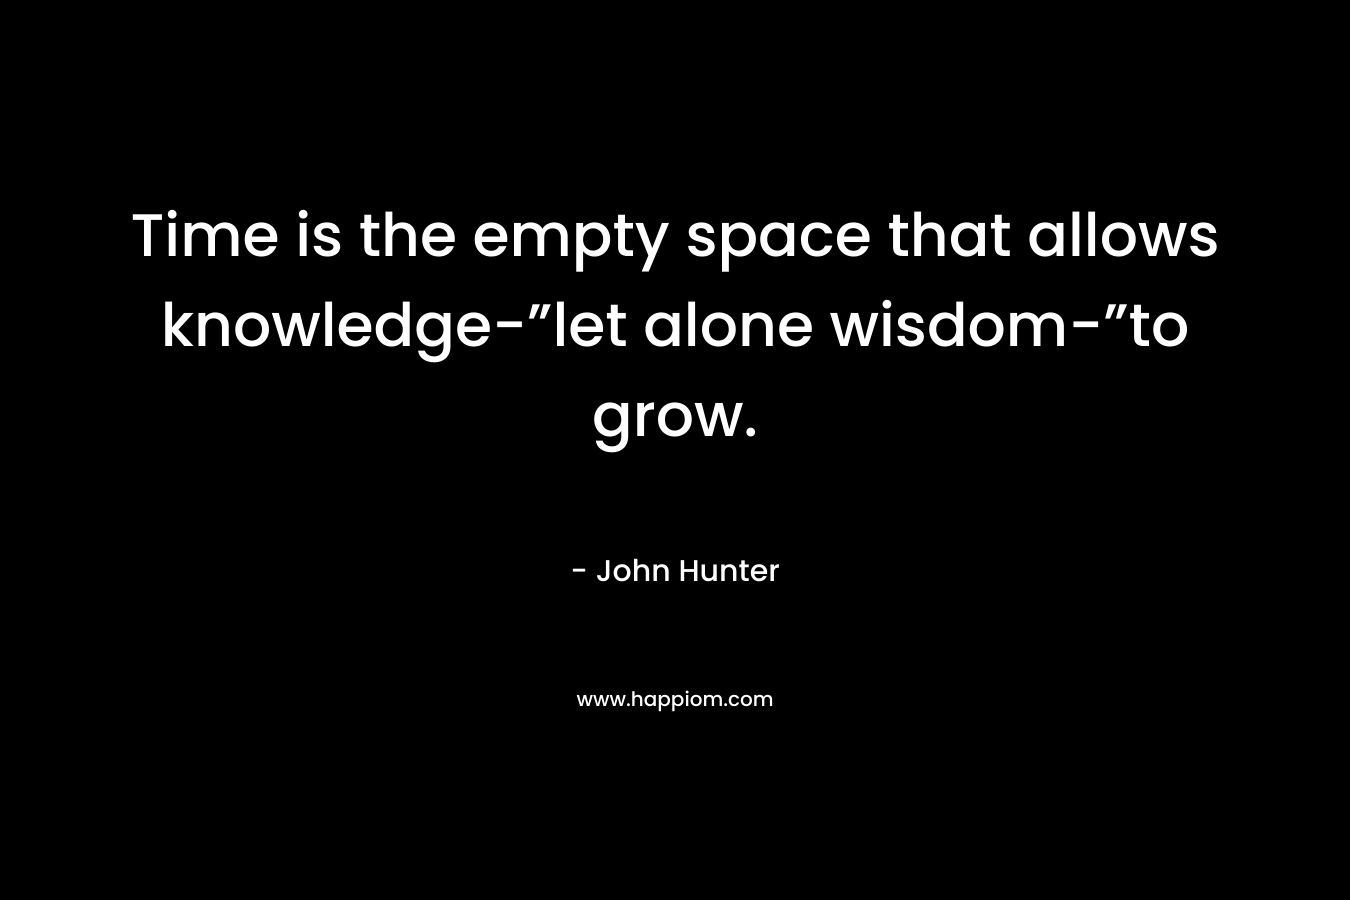 Time is the empty space that allows knowledge-”let alone wisdom-”to grow.